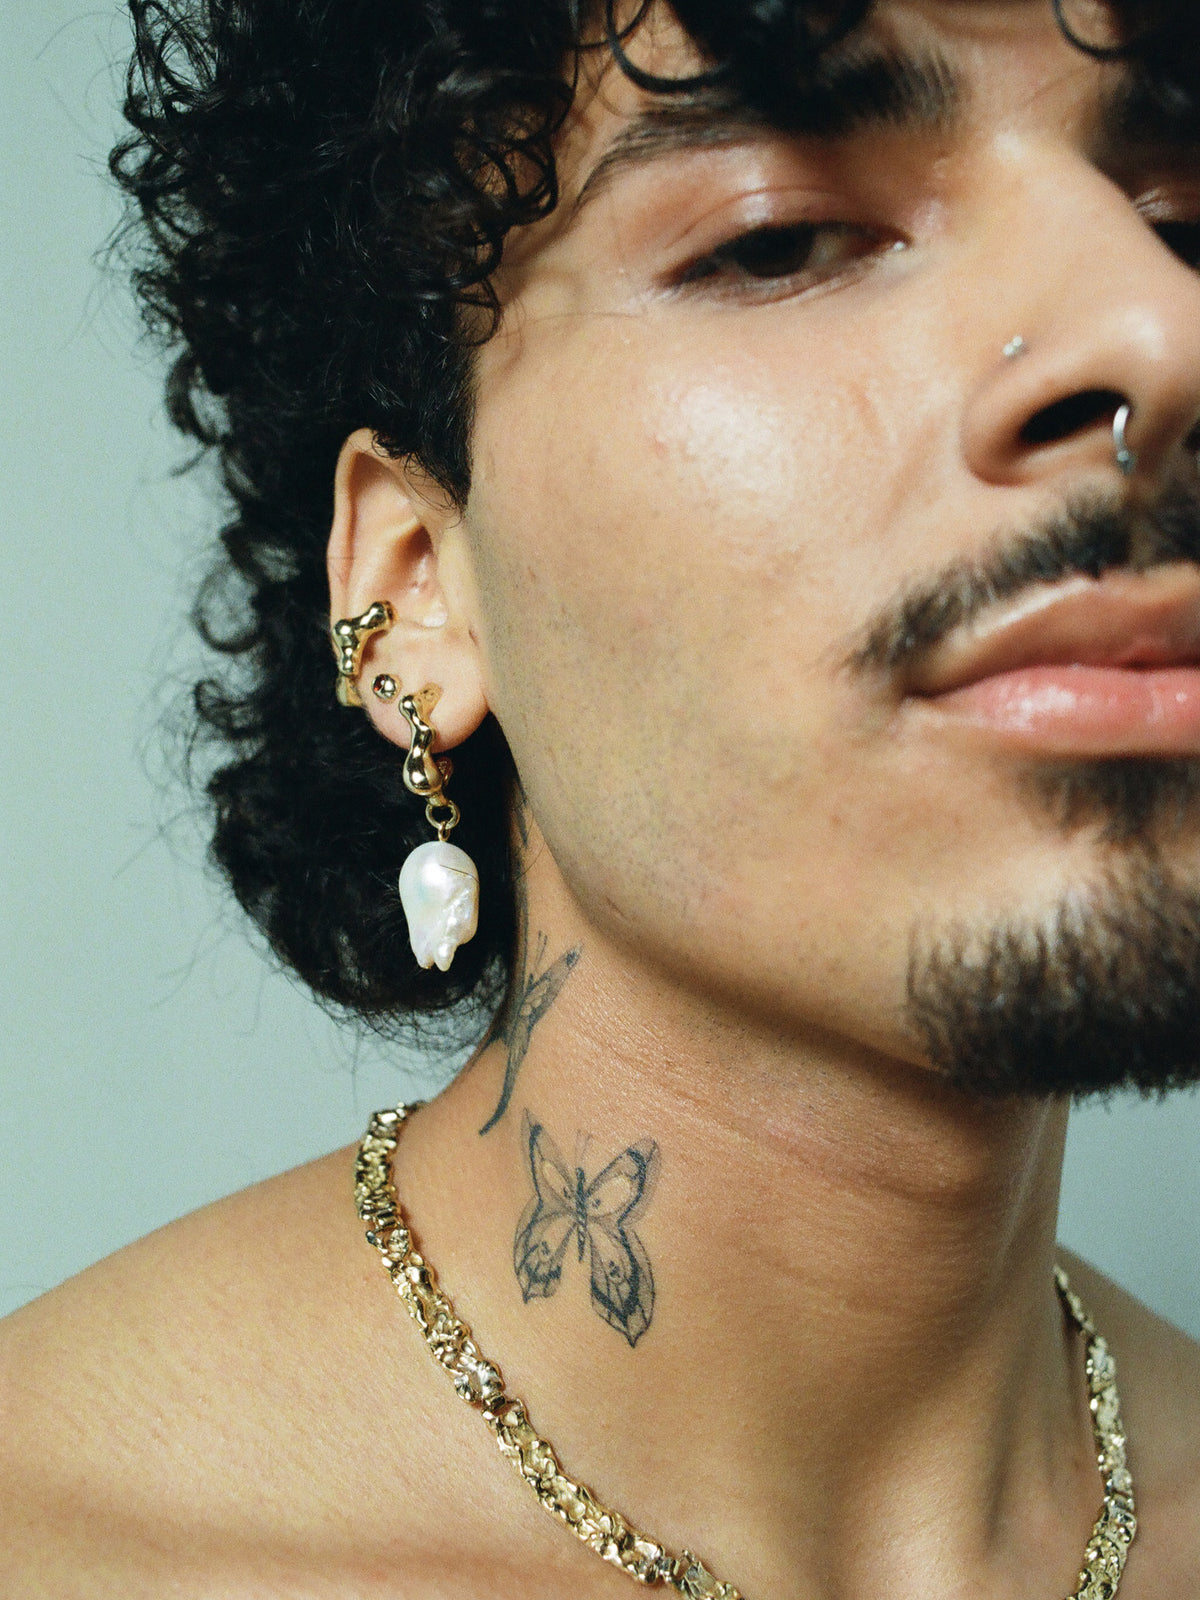 FARIS SEEP BAROQUE Drop Earrings in 14k Gold Plate shown on male model, styled with EGG GEM Stud in 14k Gold/Garnet, SEEP Ear Cuff in 14k Gold Plate, and BRUTO Collar in 14k Gold Plate